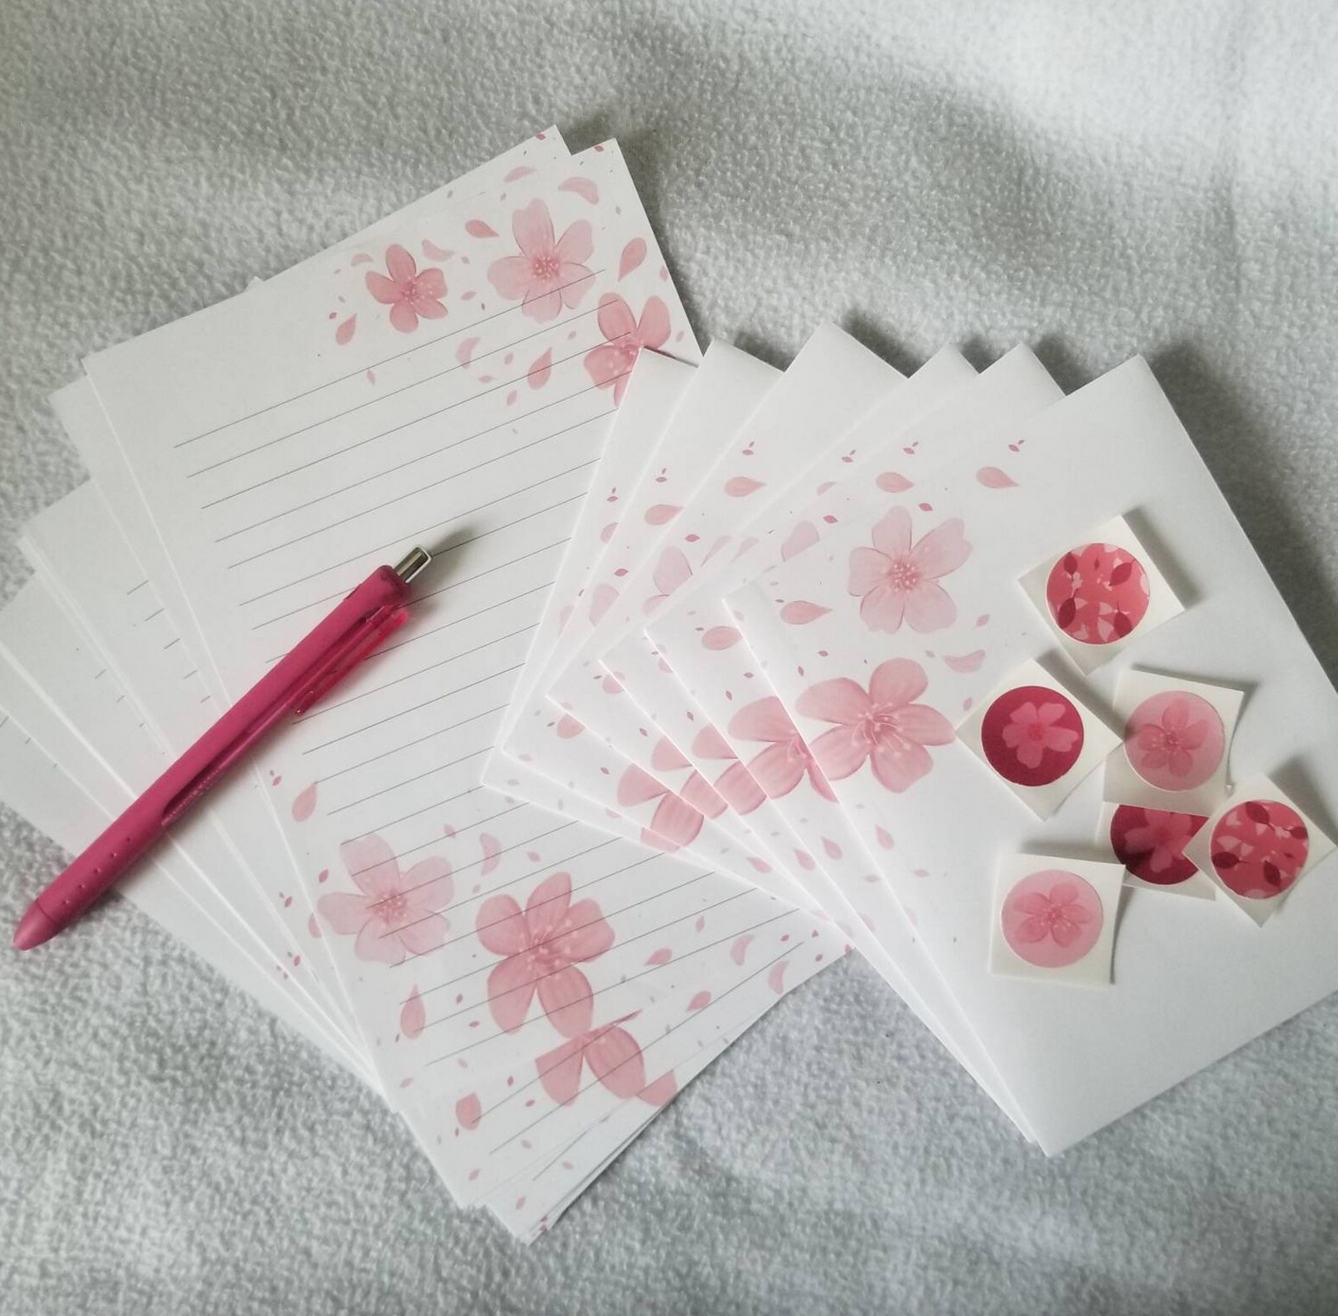 Cherry blossom stationary set with pink pen